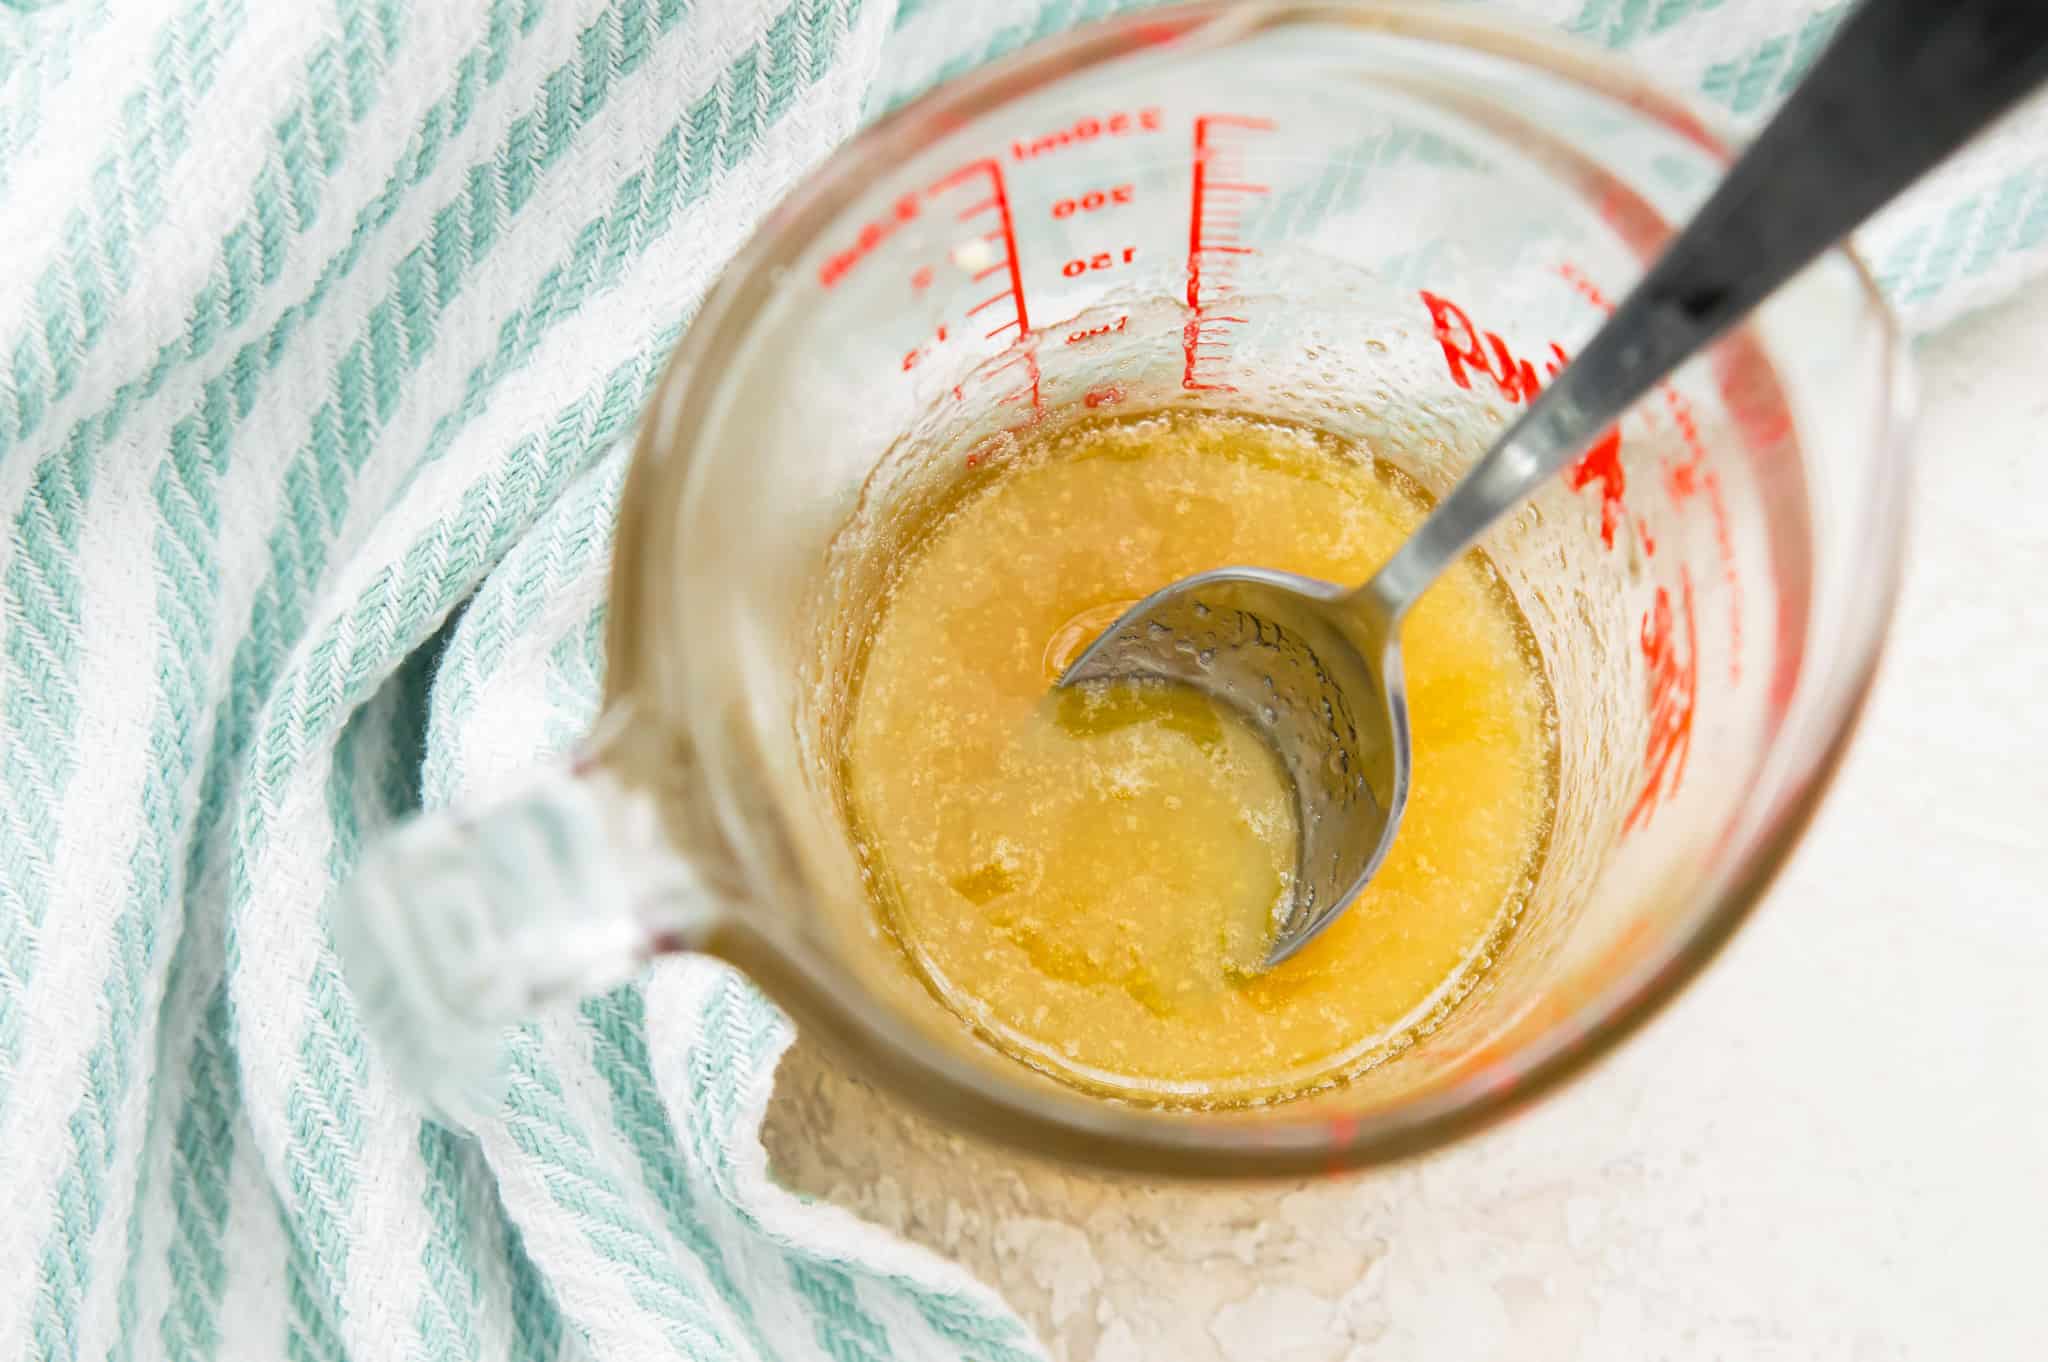 A glass measuring cup filled with a honey glaze with a spoon in it.